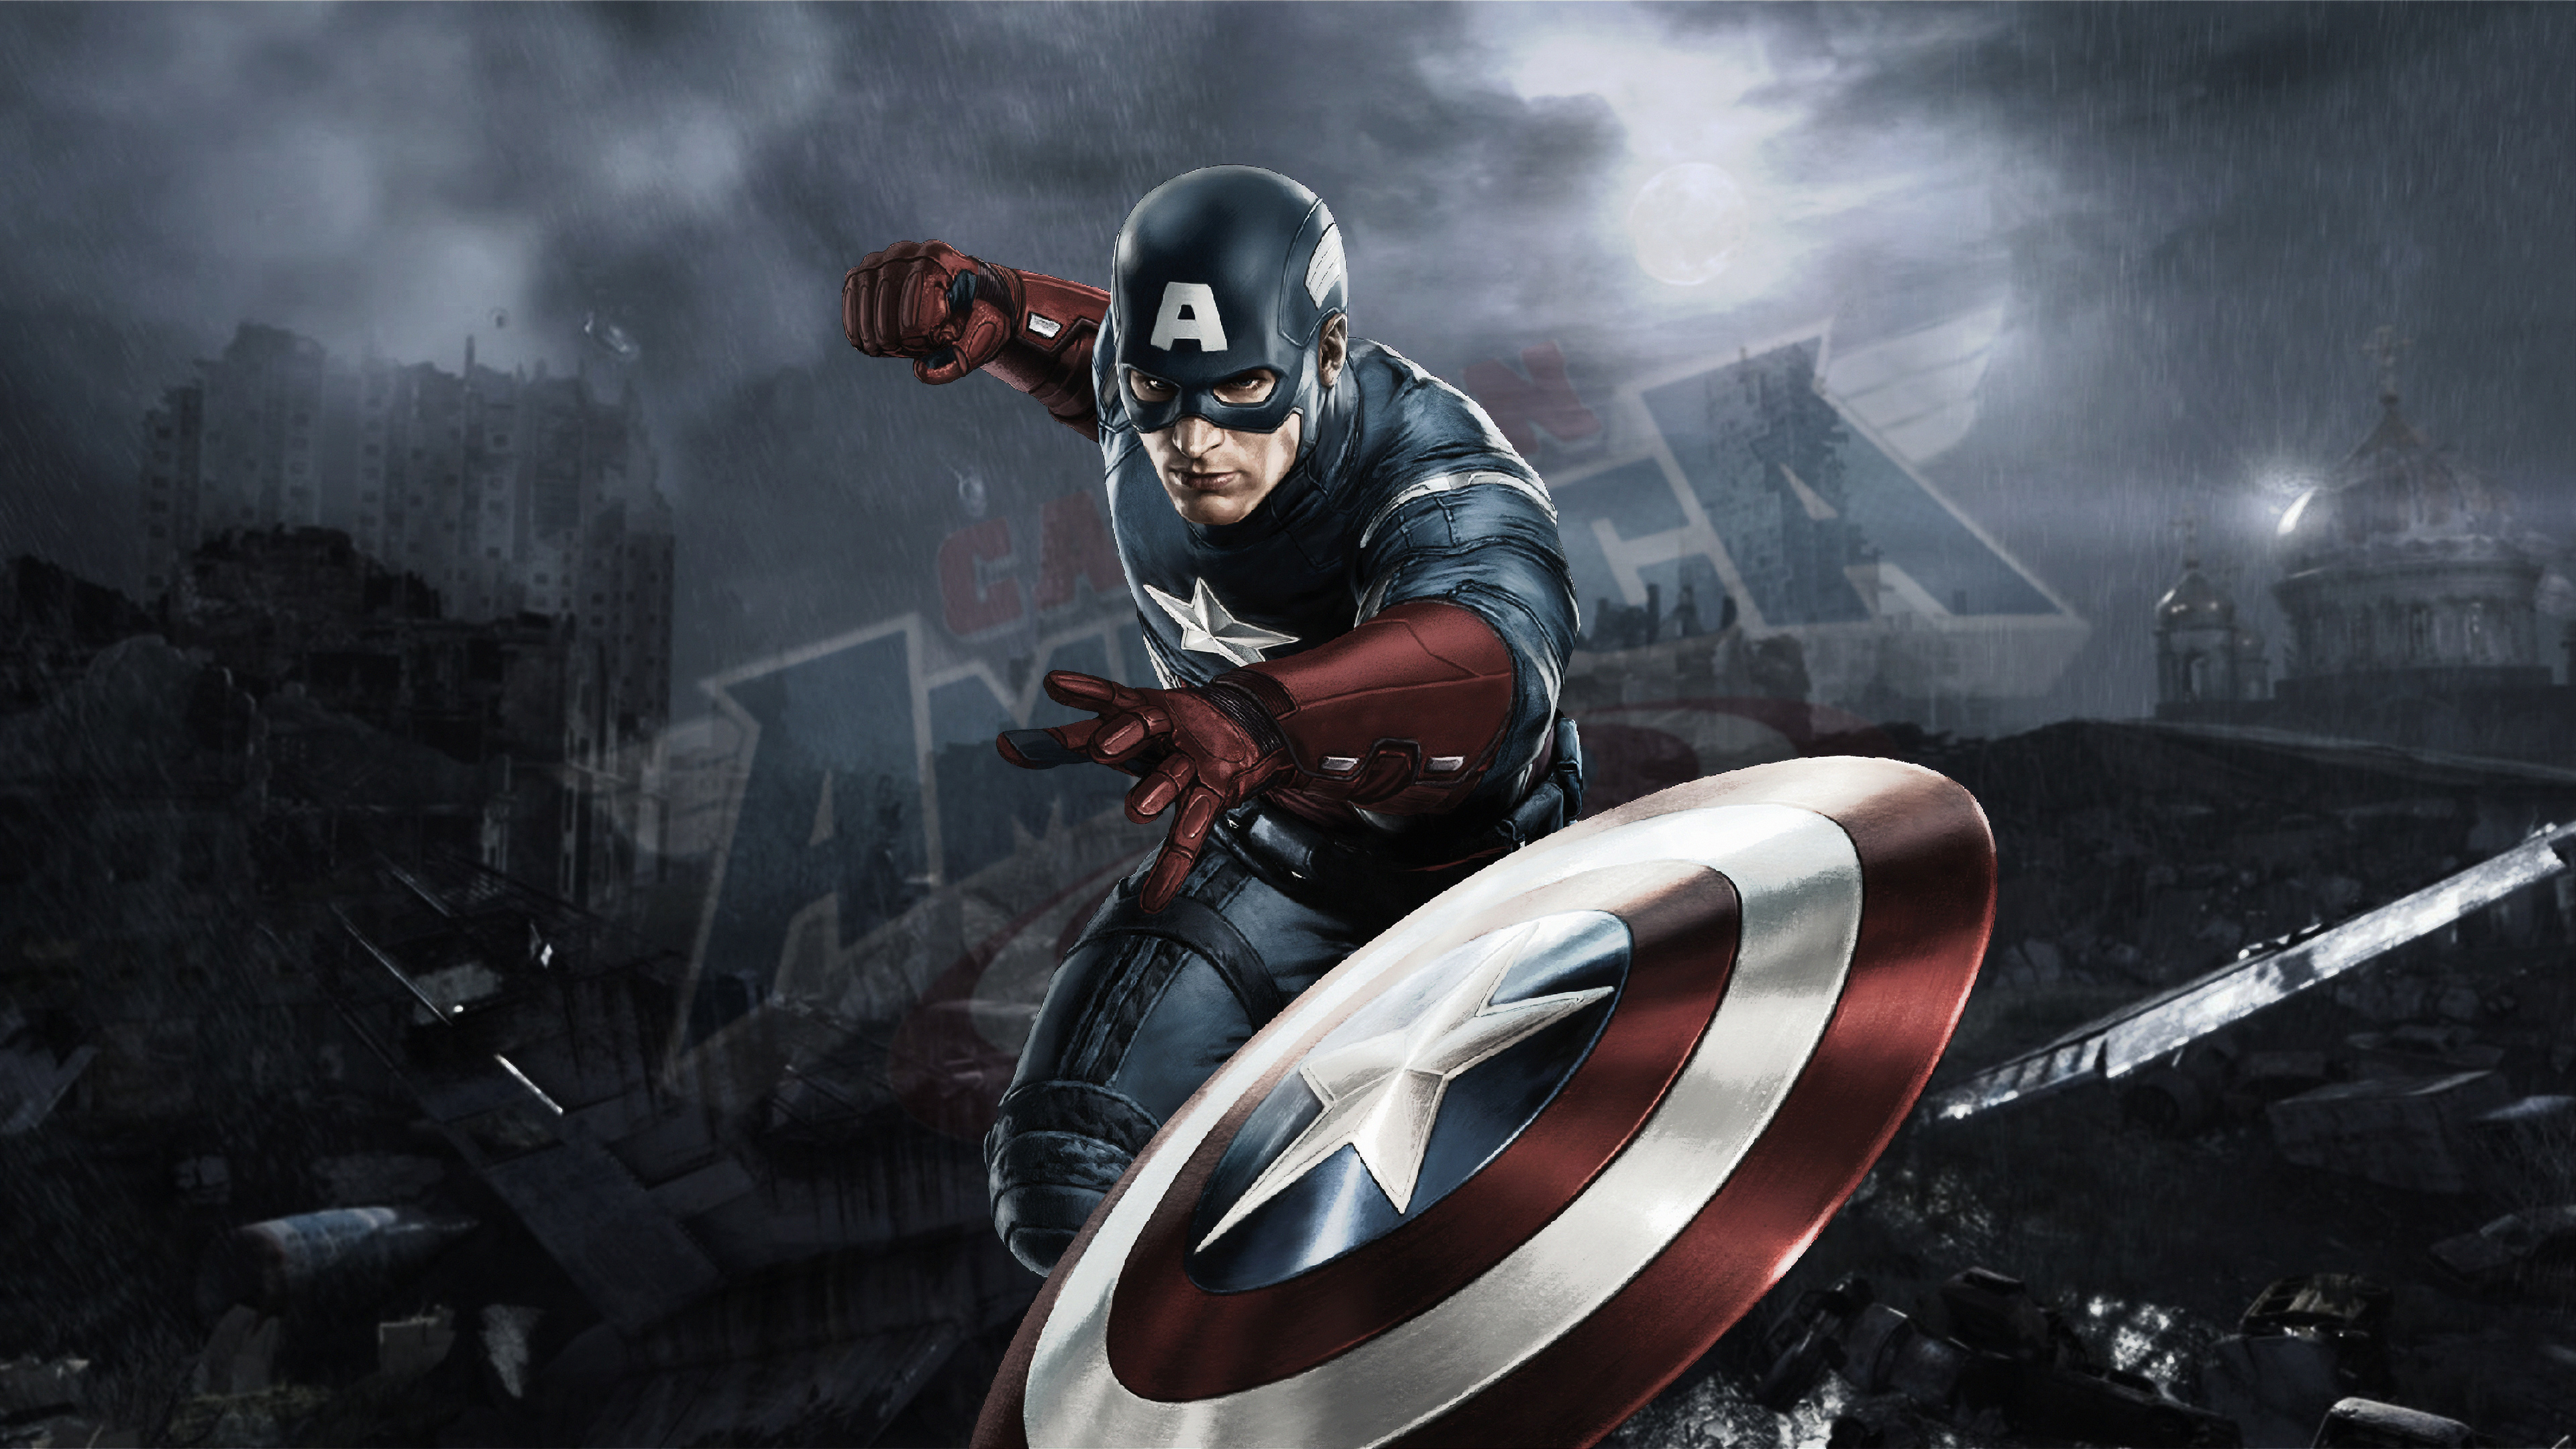 41+ Chris Evans Captain America Wallpapers: HD, 4K, 5K for PC and Mobile |  Download free images for iPhone, Android